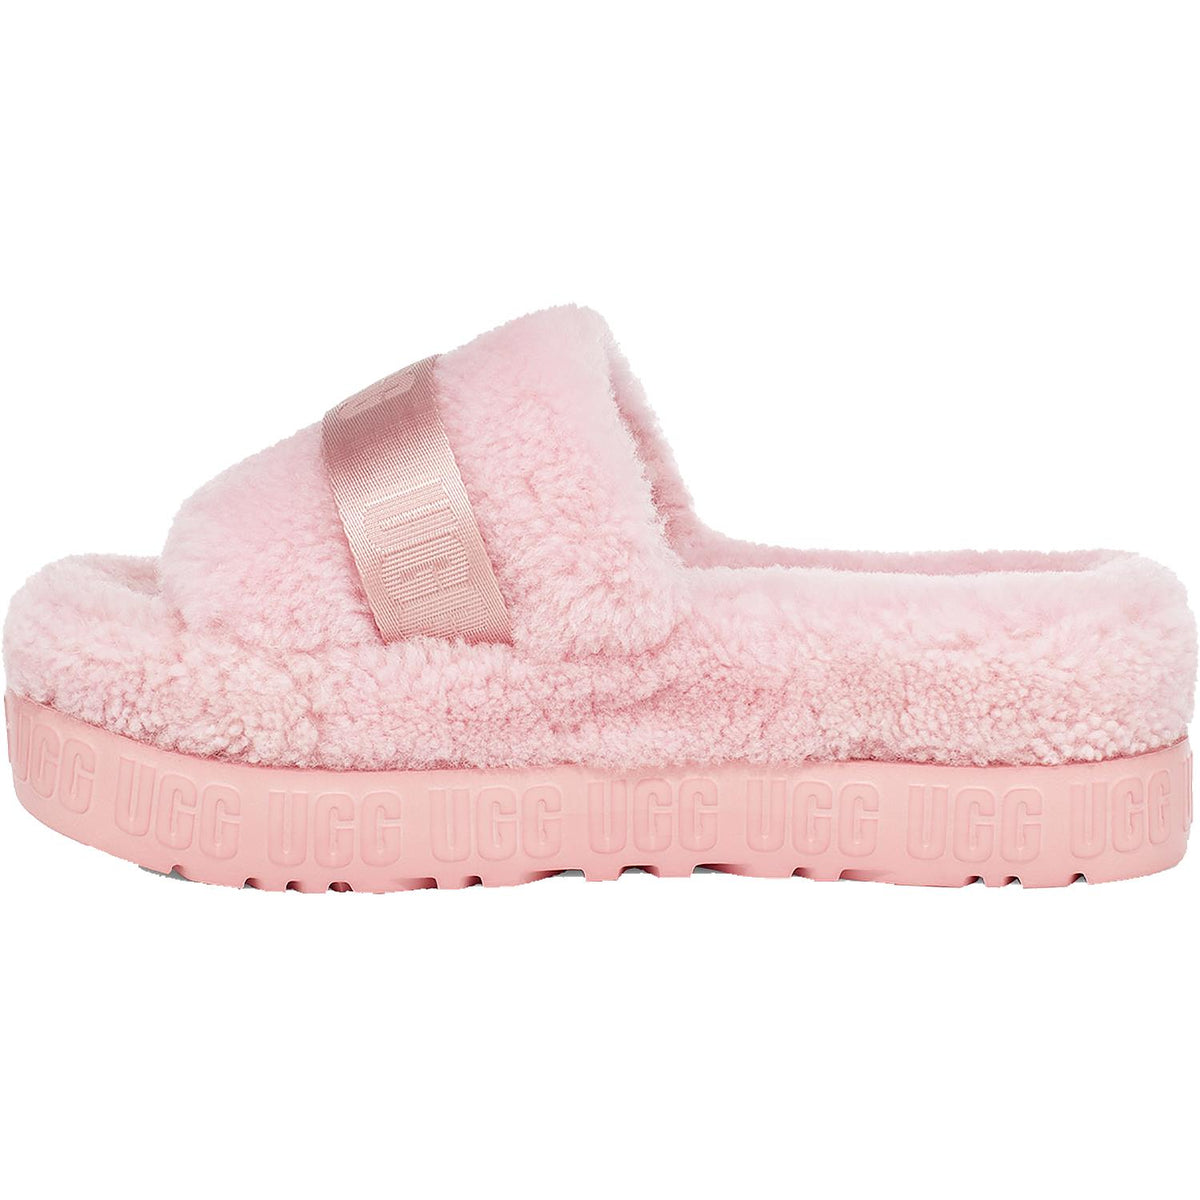 CLF Fluff'd Up Slippers in Pink